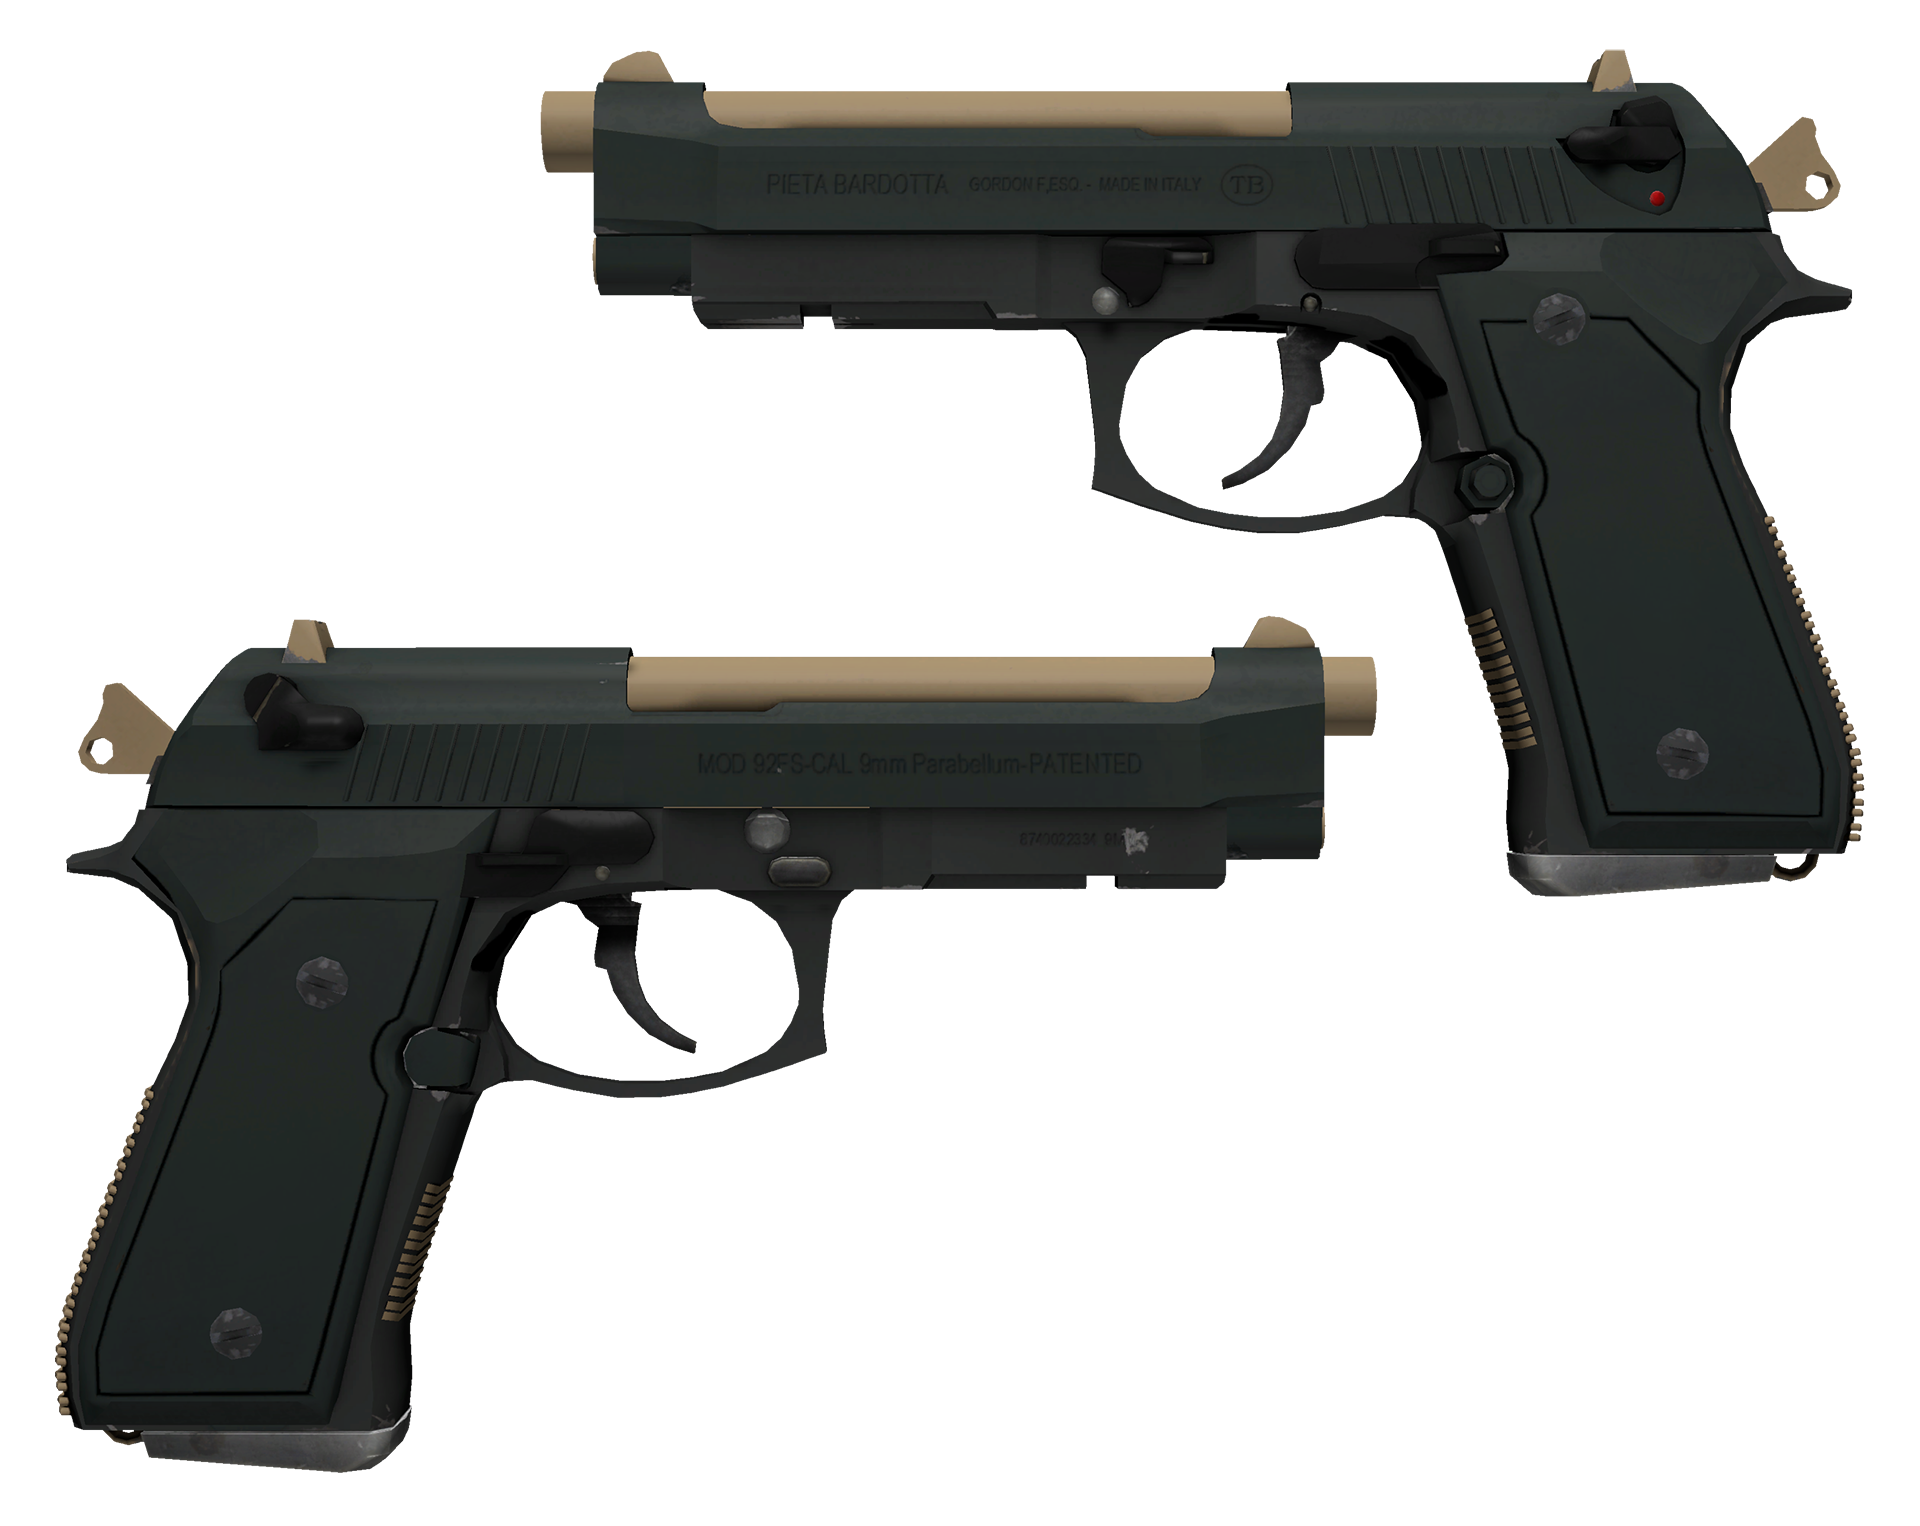 download the last version for apple SCAR-20 Contractor cs go skin